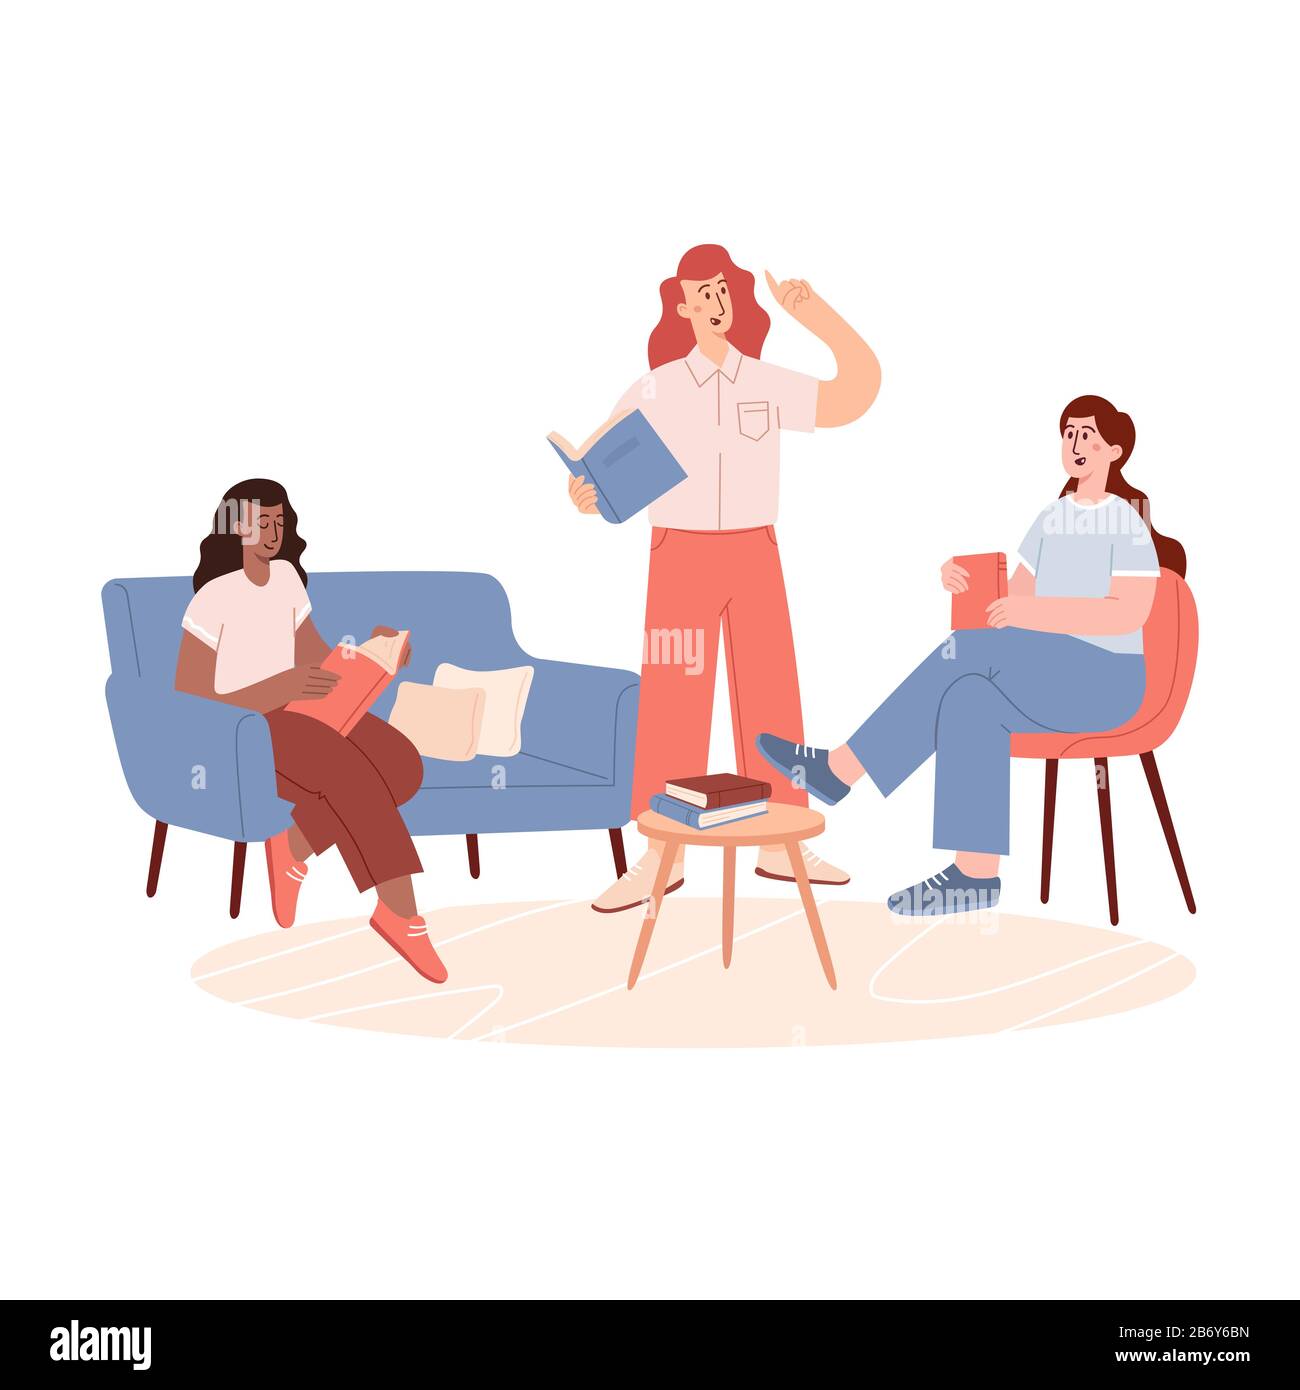 Group of woman sitting on sofa and listening to girl reading book.  Stock Vector